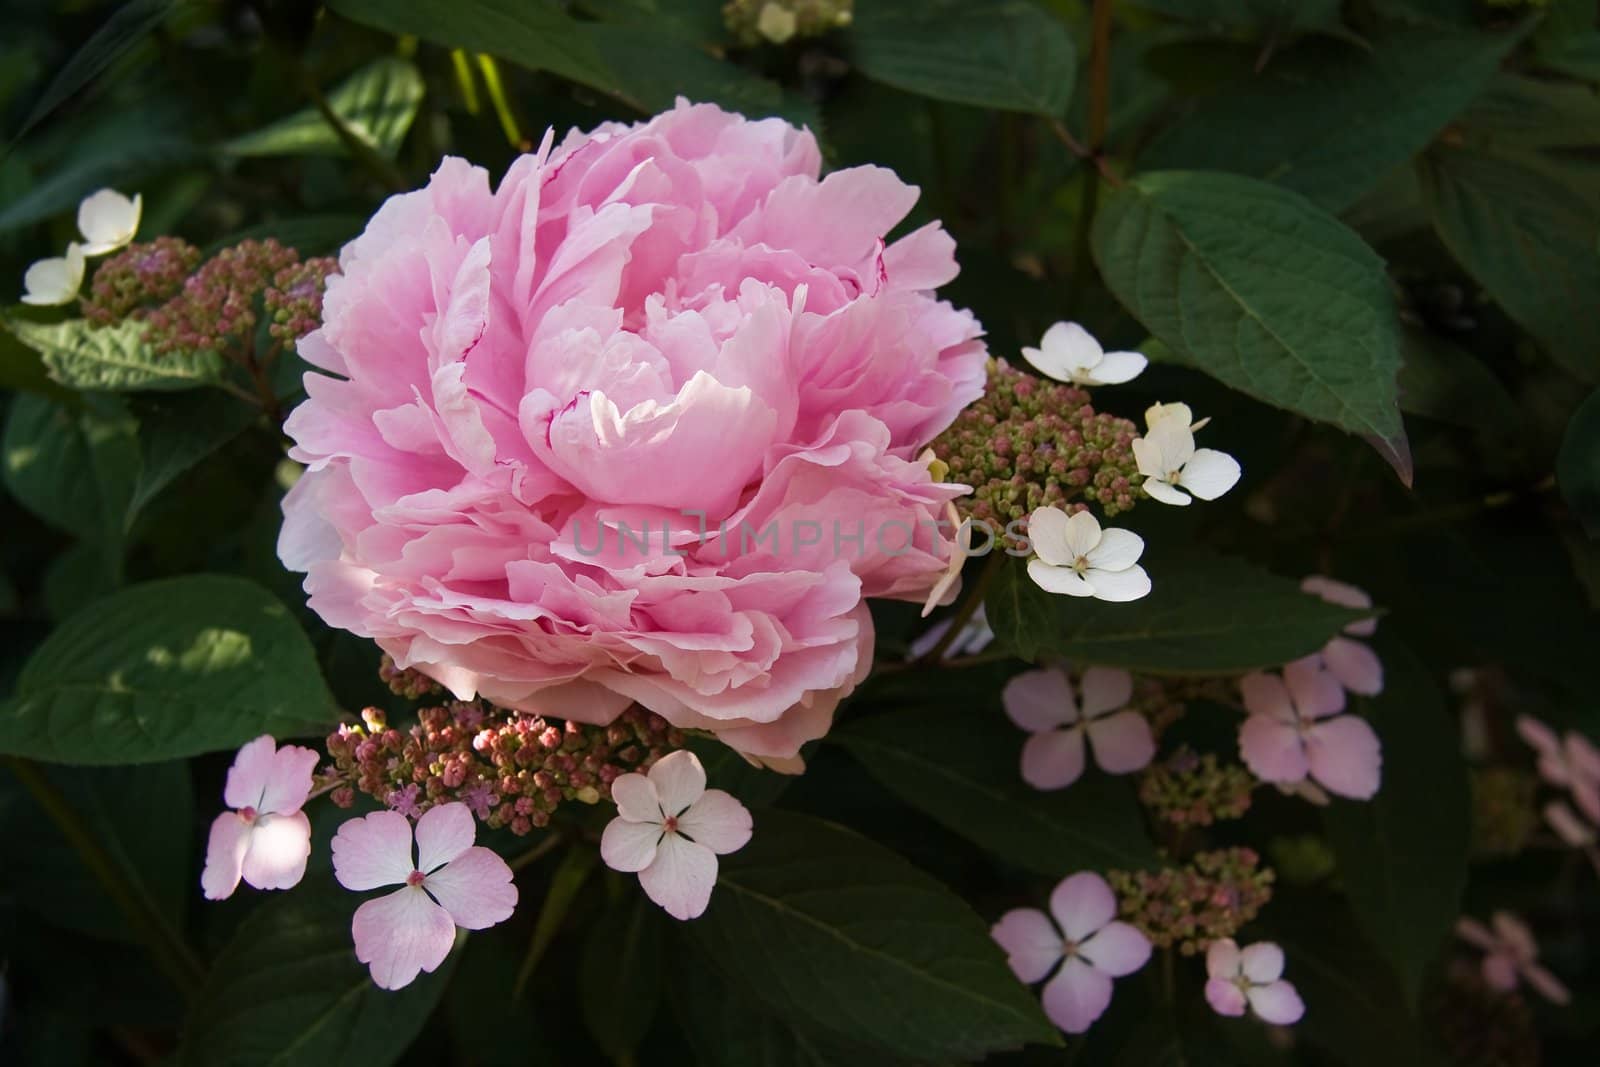 Pink peony and lacecap hydrangea flowers by Colette